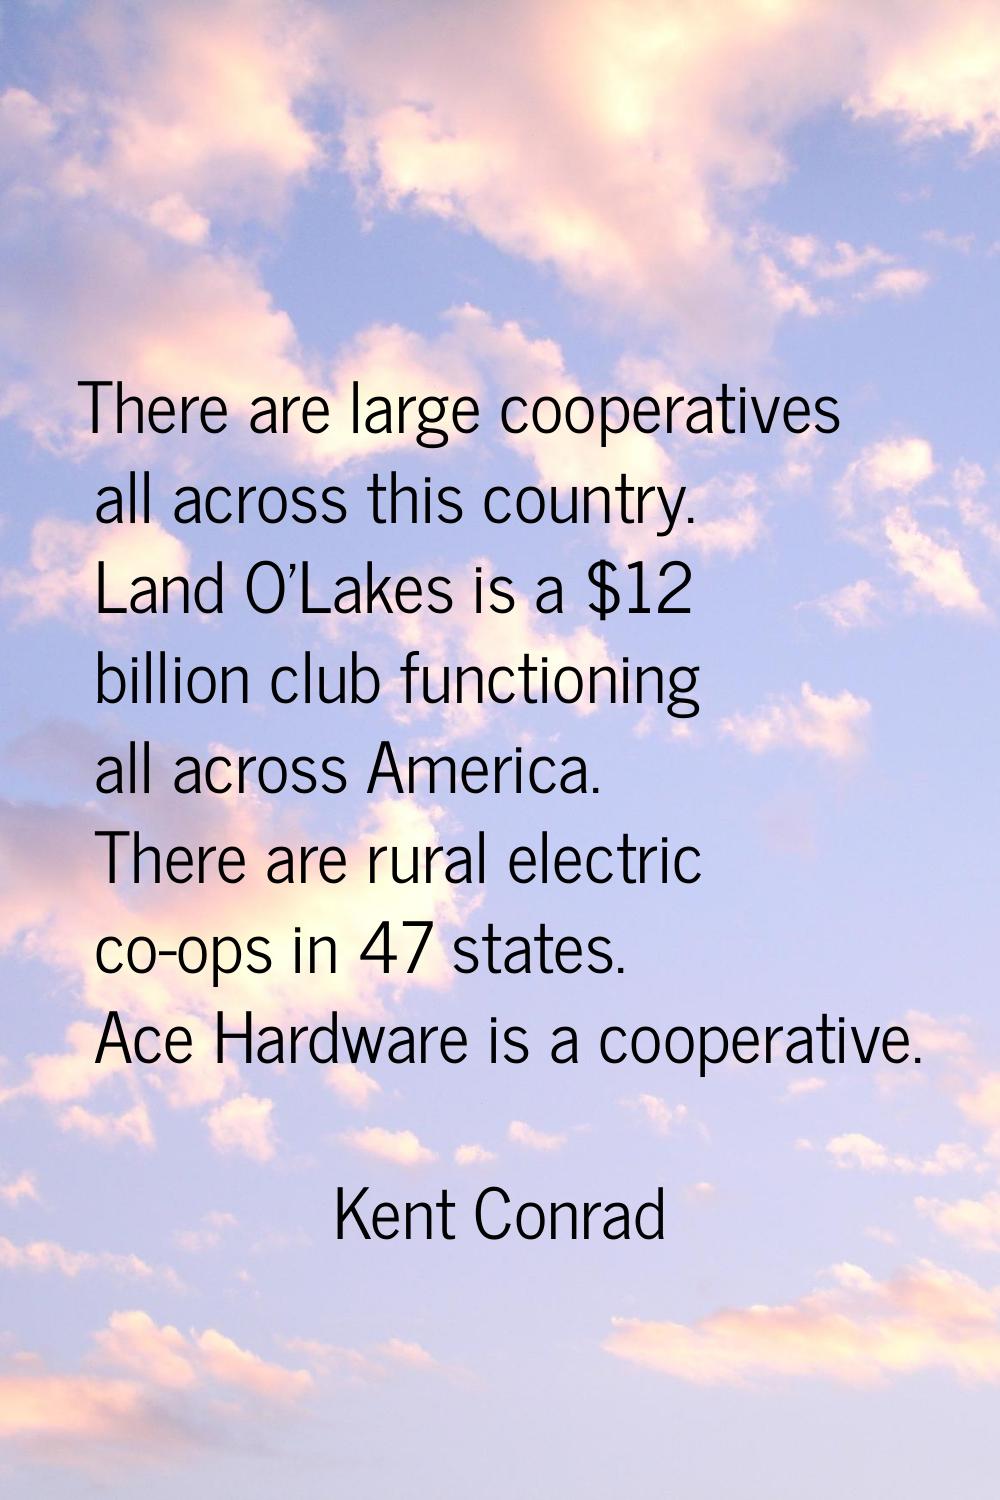 There are large cooperatives all across this country. Land O'Lakes is a $12 billion club functionin